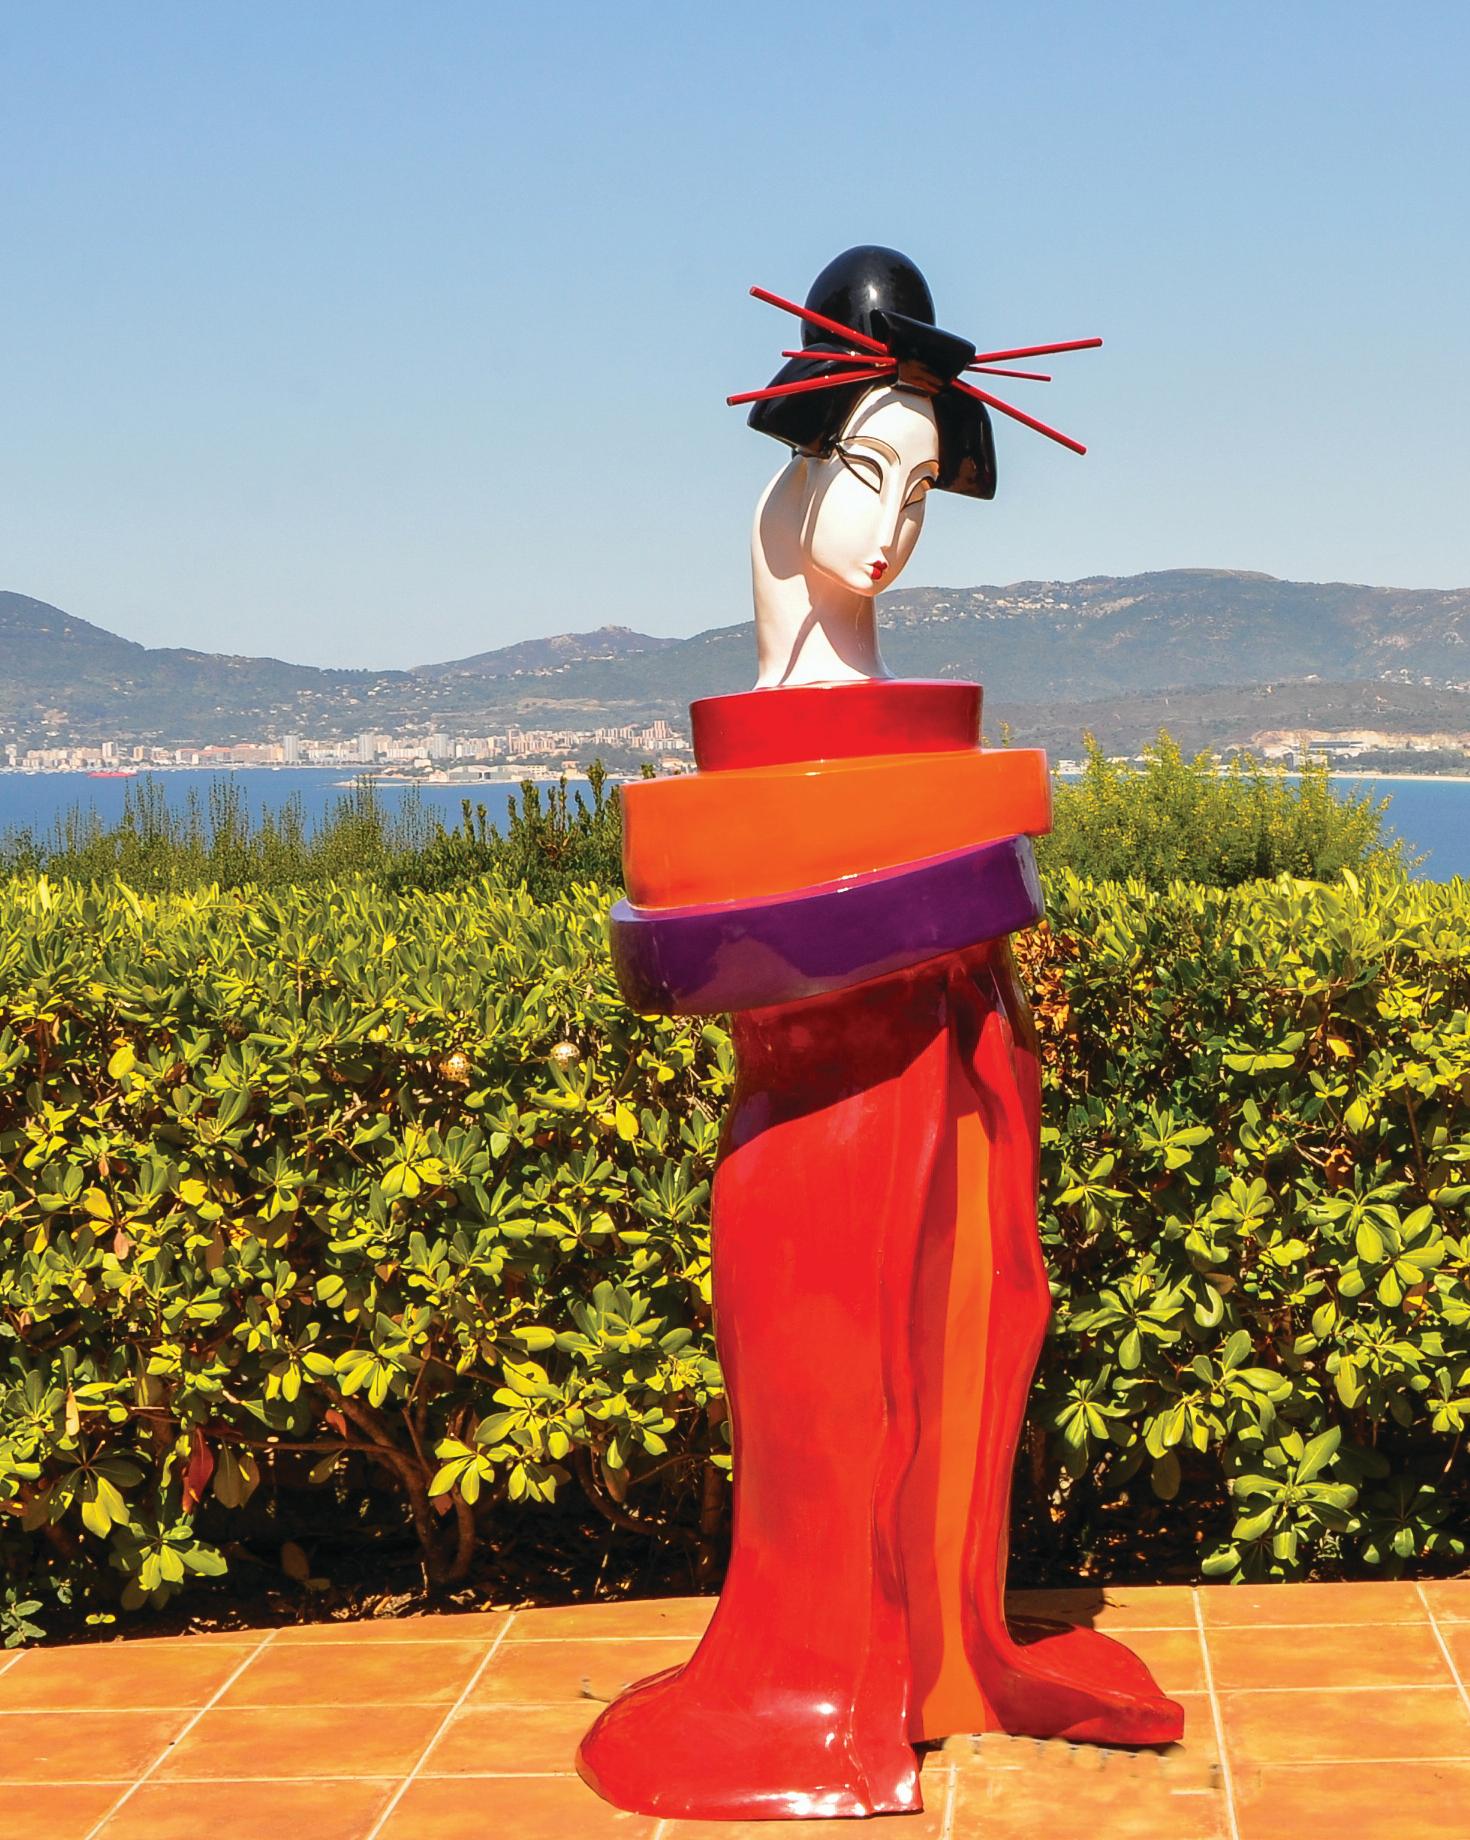 Mariko’s Gueishas are unique monumental contemporary sculptures made of resin and reinforced with an inside metallic structure, finished with a bi-component urethane paint, extremely resistant to UV exposure and outside weather. 
Mariko grew up in